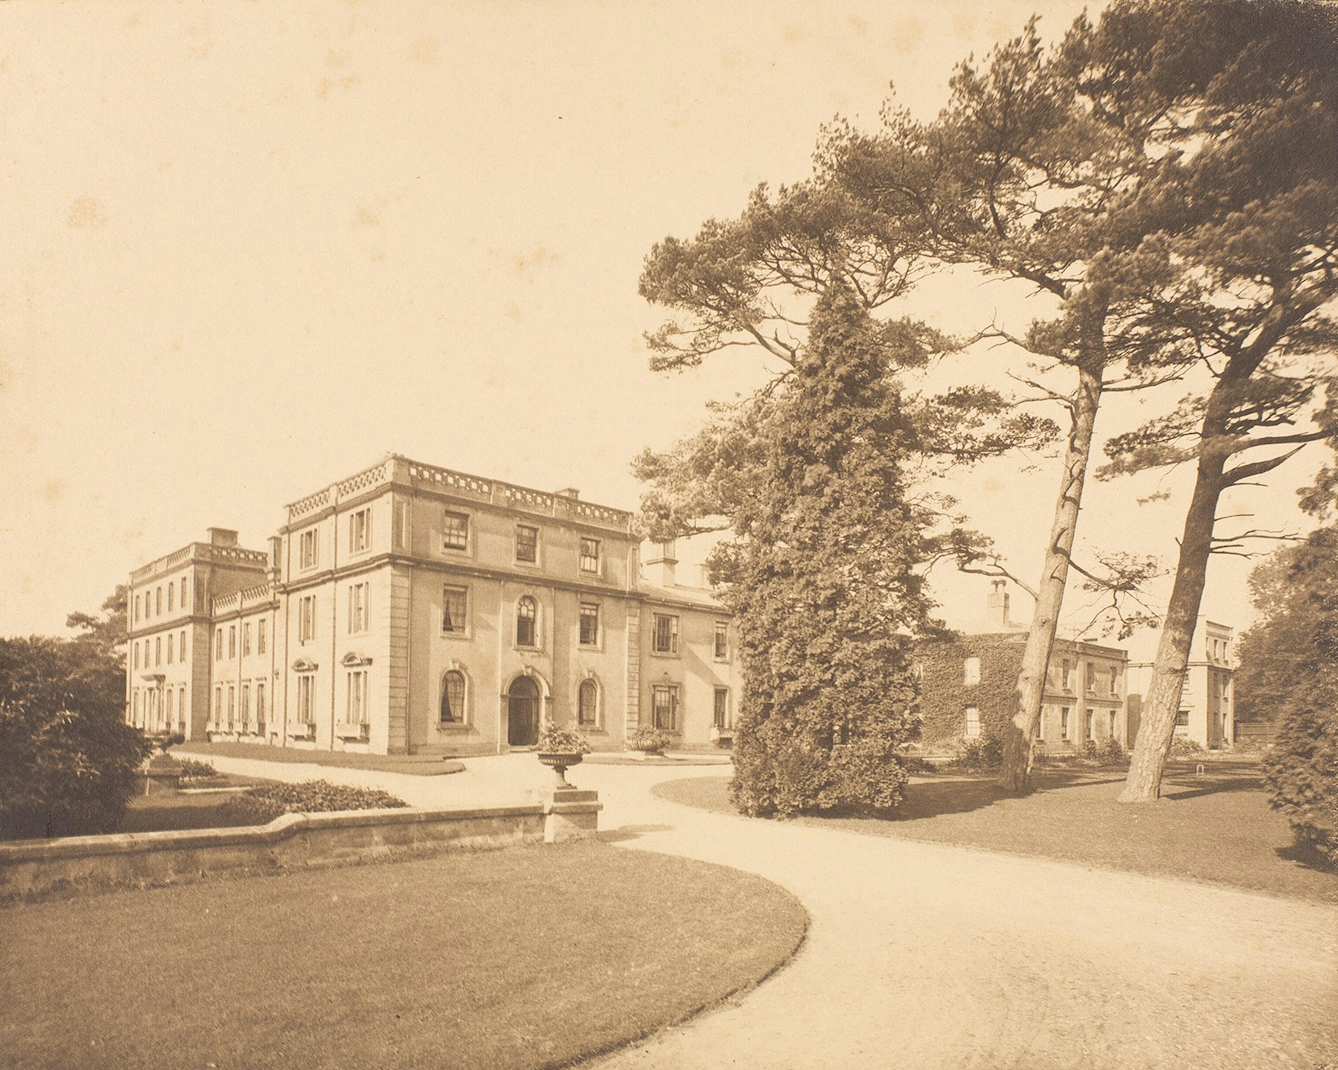 A page from a photo album showing Ticehurst Asylum, a grand building with a sweeping drive and mature trees in front of it.